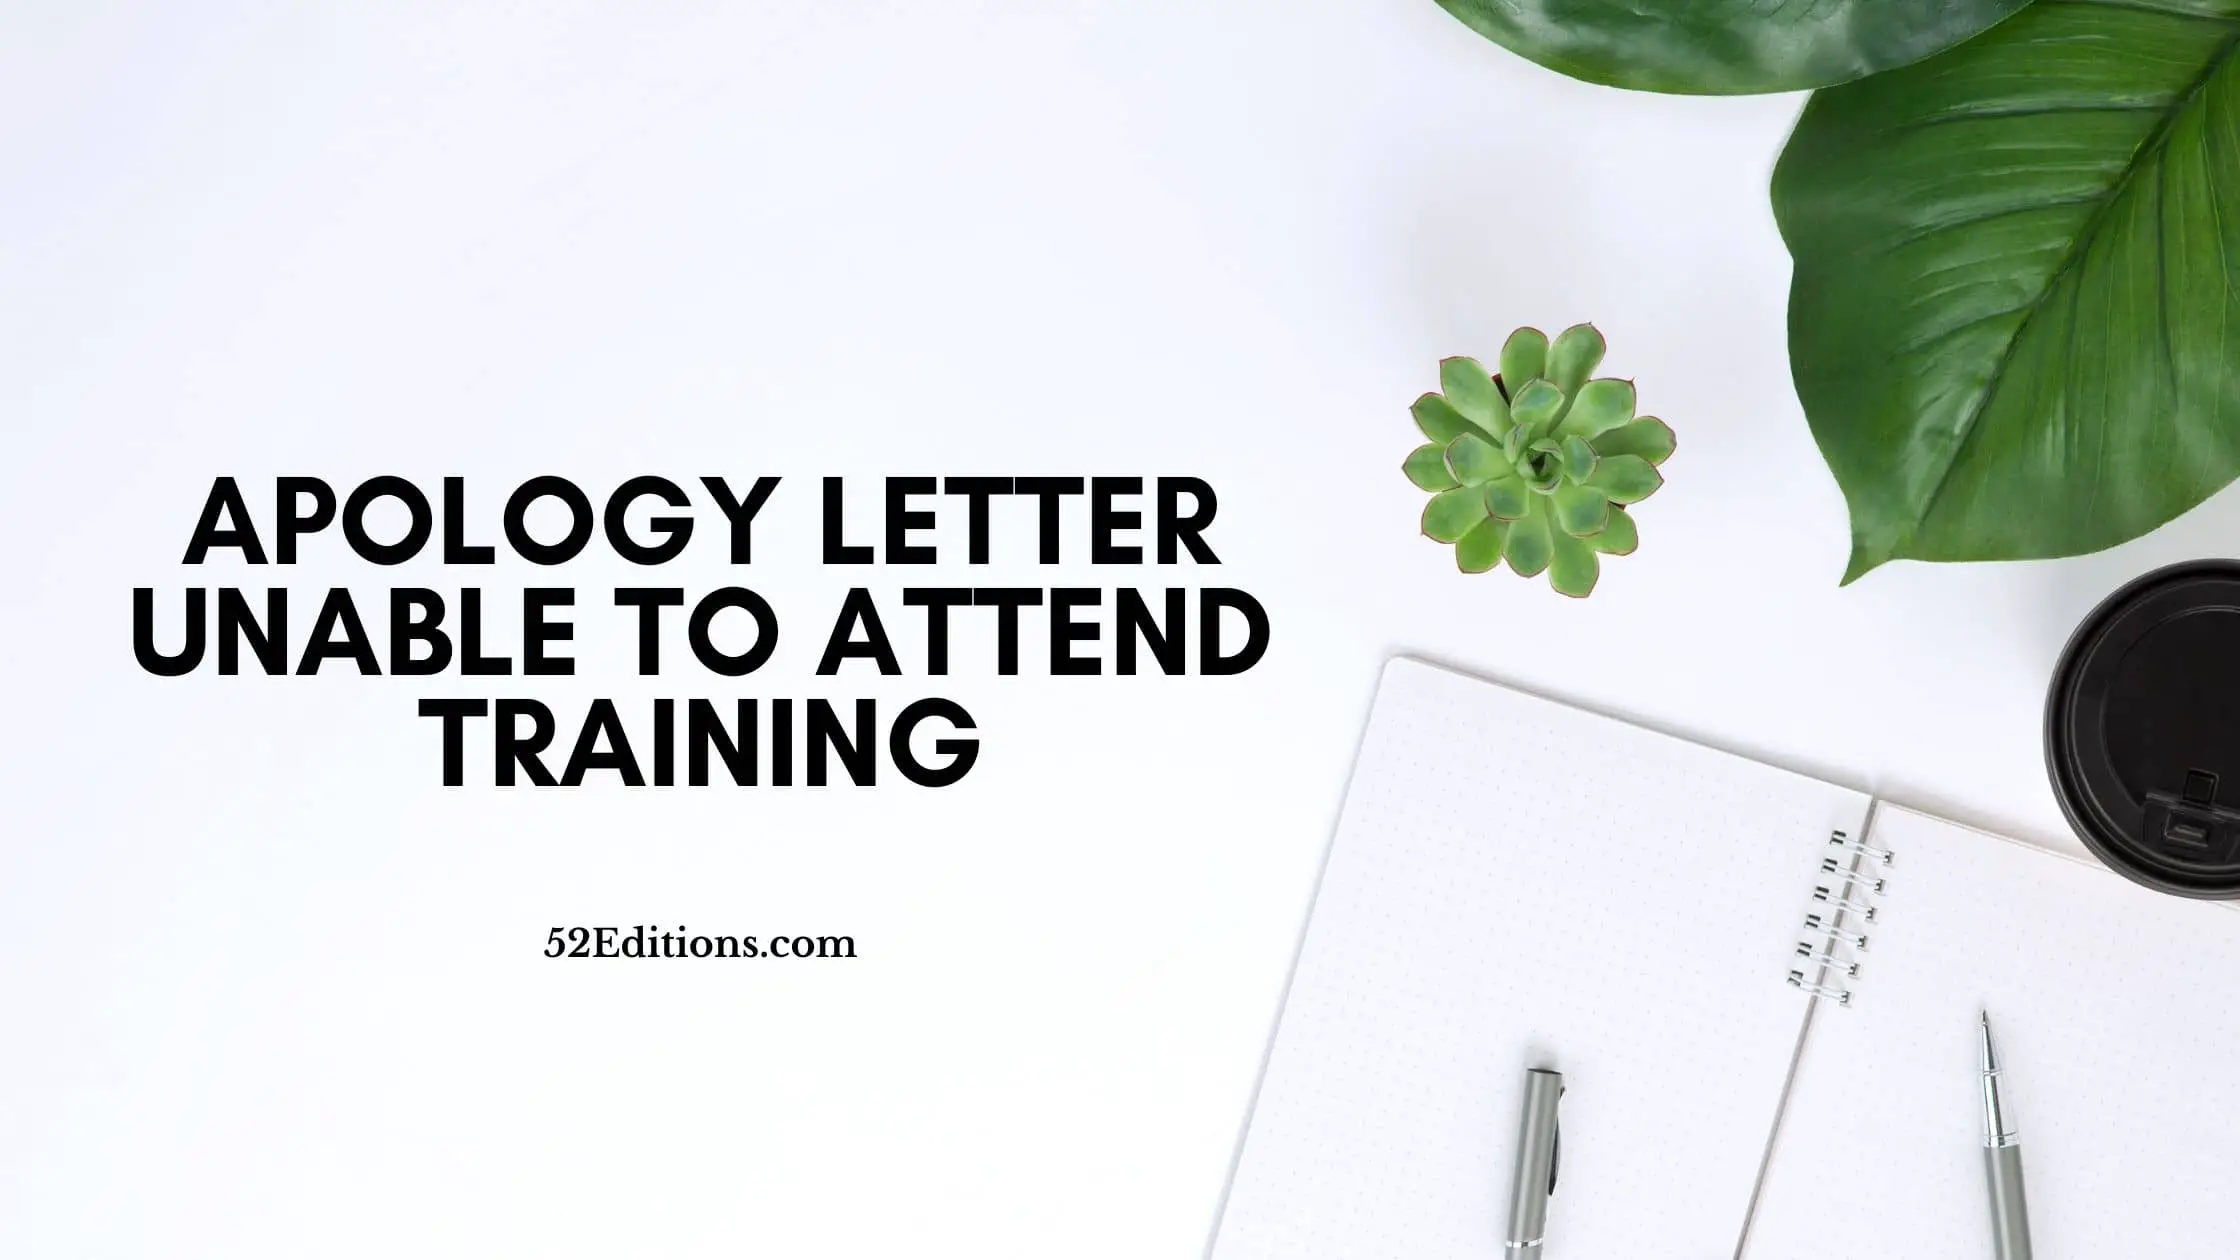 Apology Letter For Being Unable To Attend Training // FREE ...